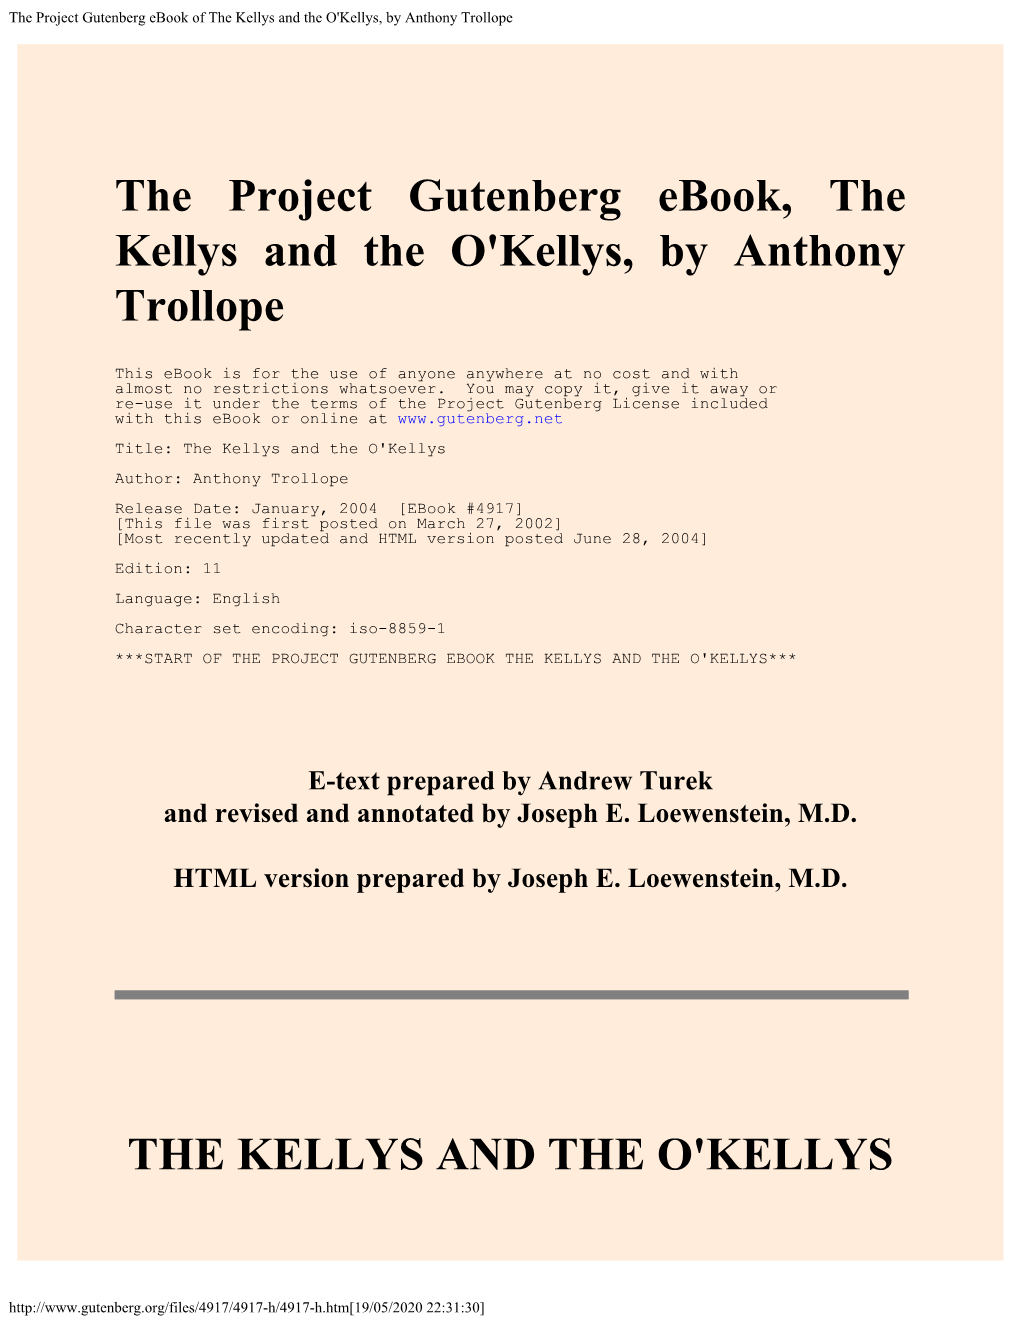 The Project Gutenberg Ebook of the Kellys and the O'kellys, by Anthony Trollope